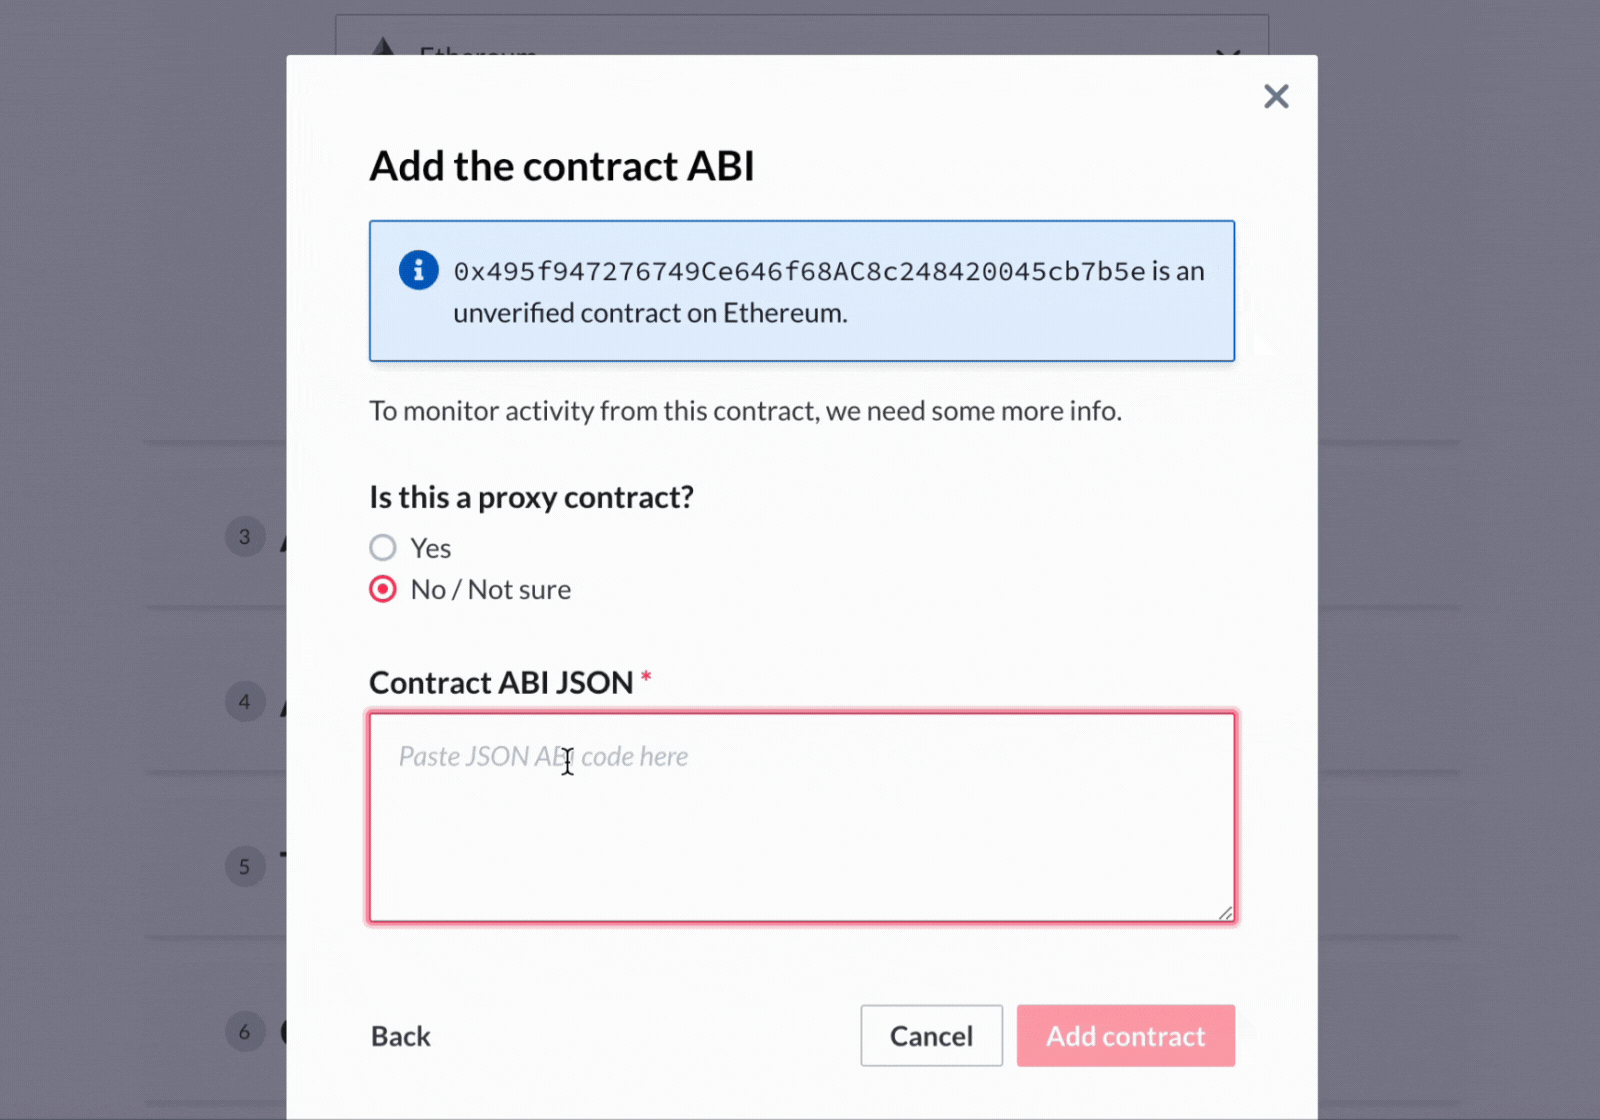 Add the contract ABI JSON